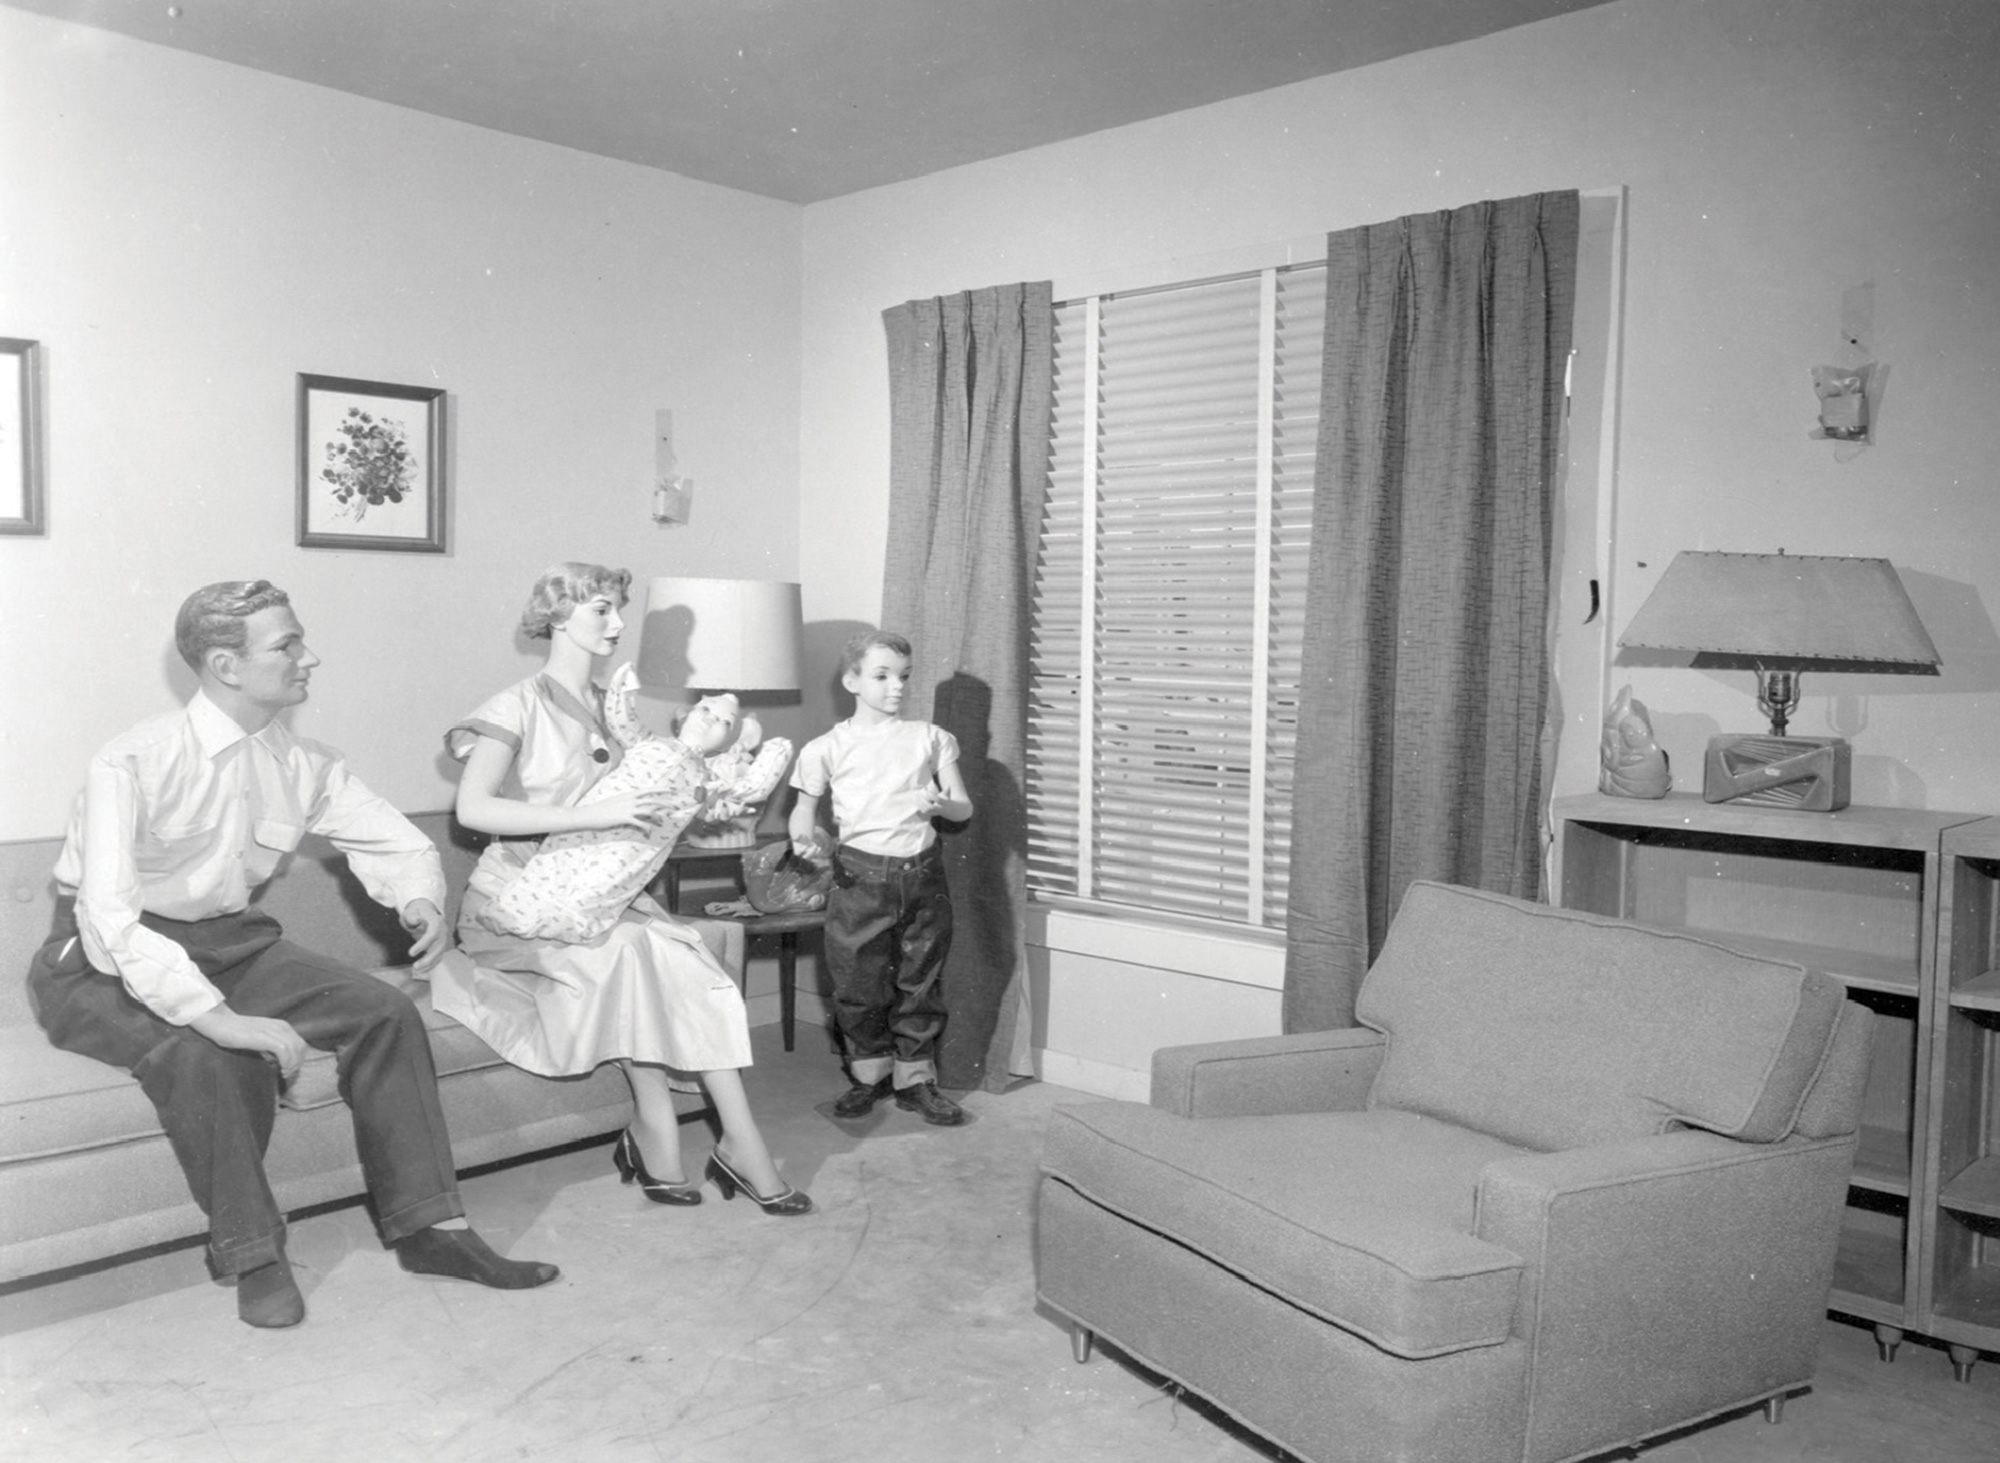 A photograph from Operation Cue depicting a nuclear family sitting in a living room.